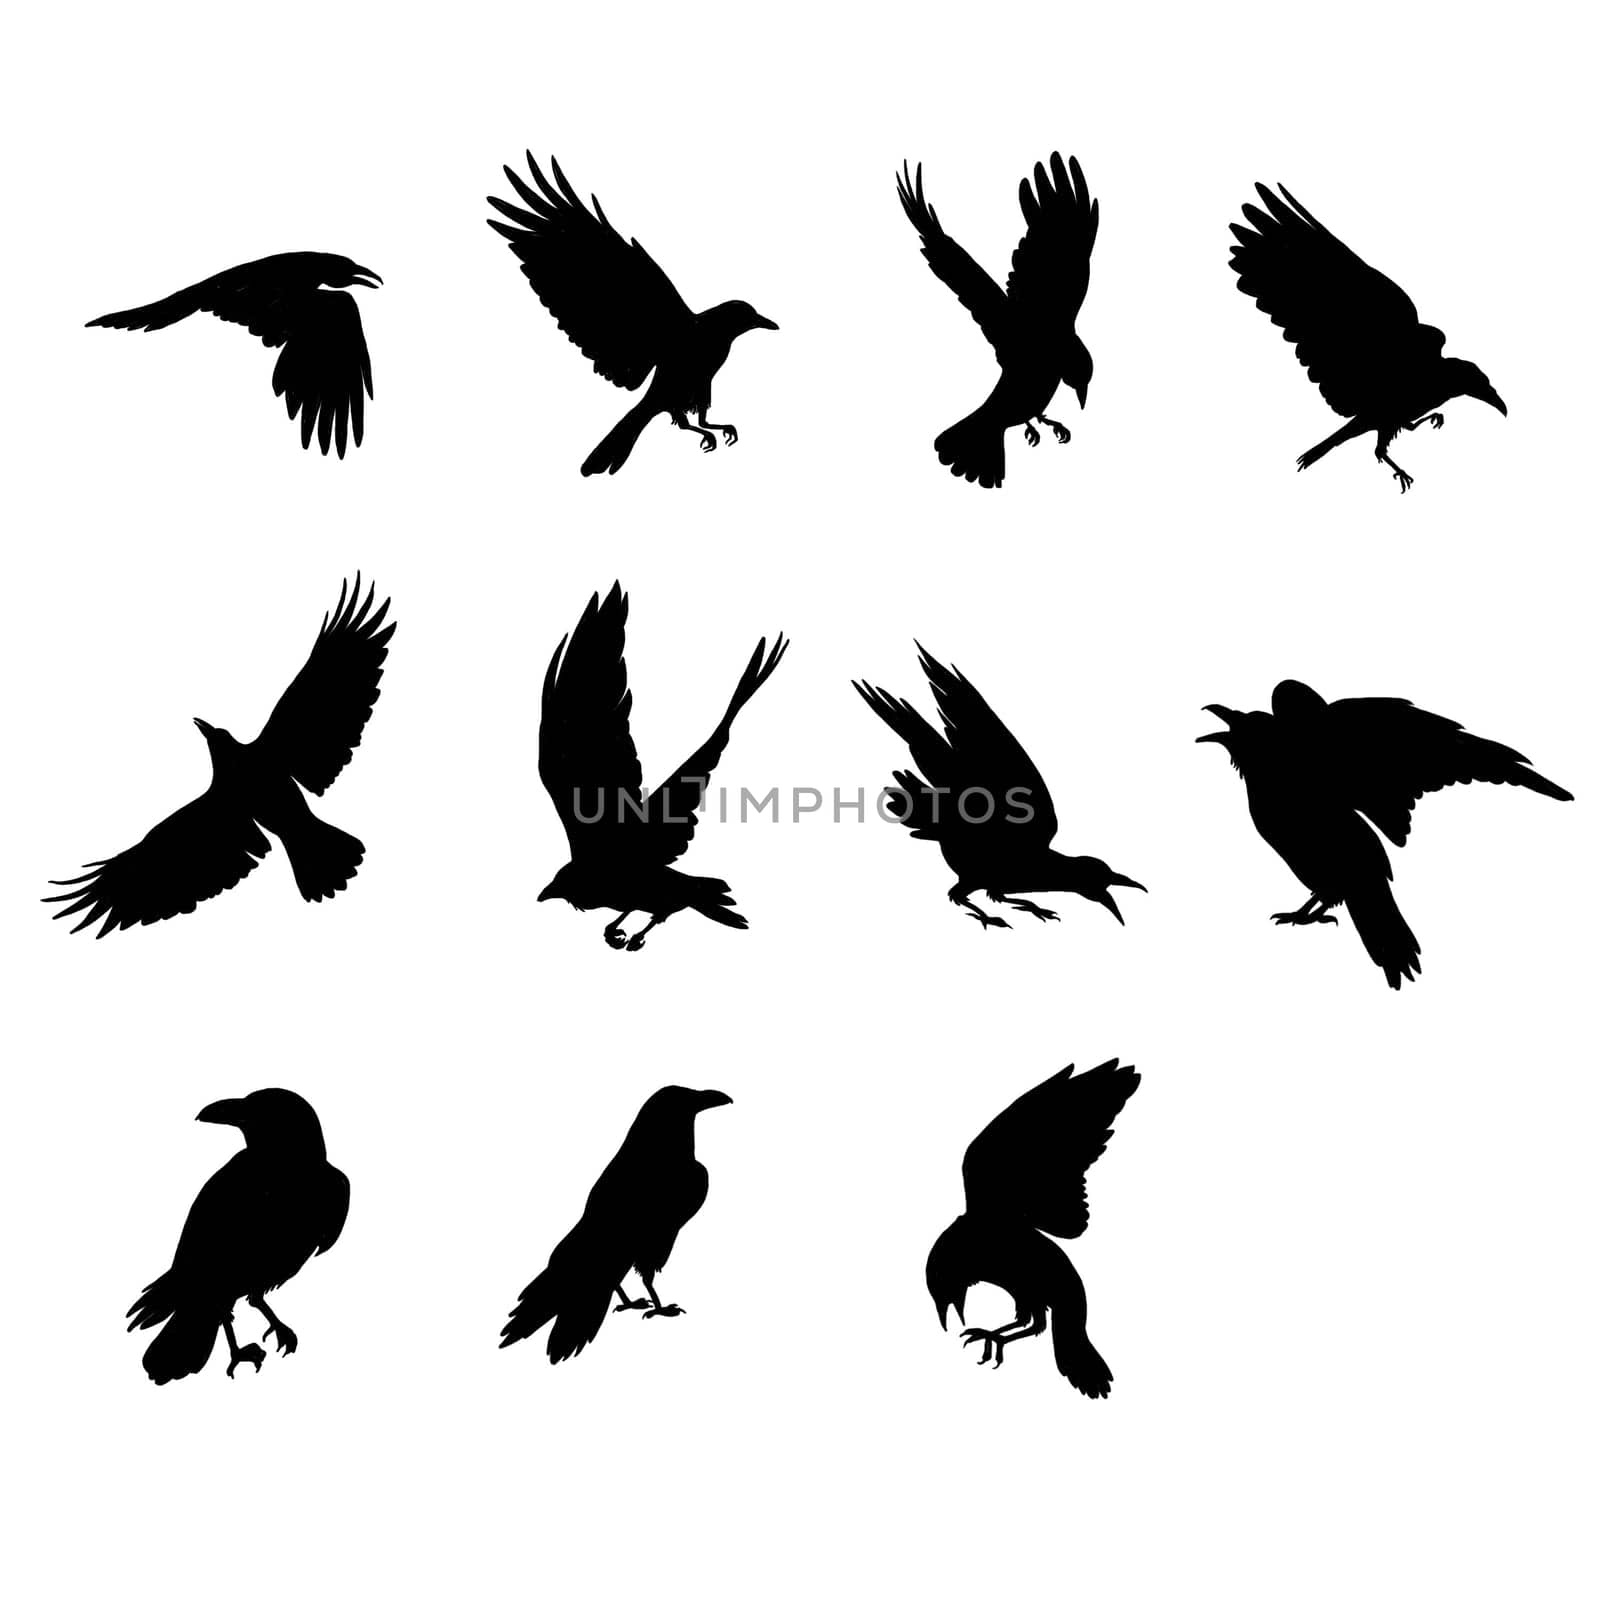 Simple crow illustration, editable elements, can be used in logo design